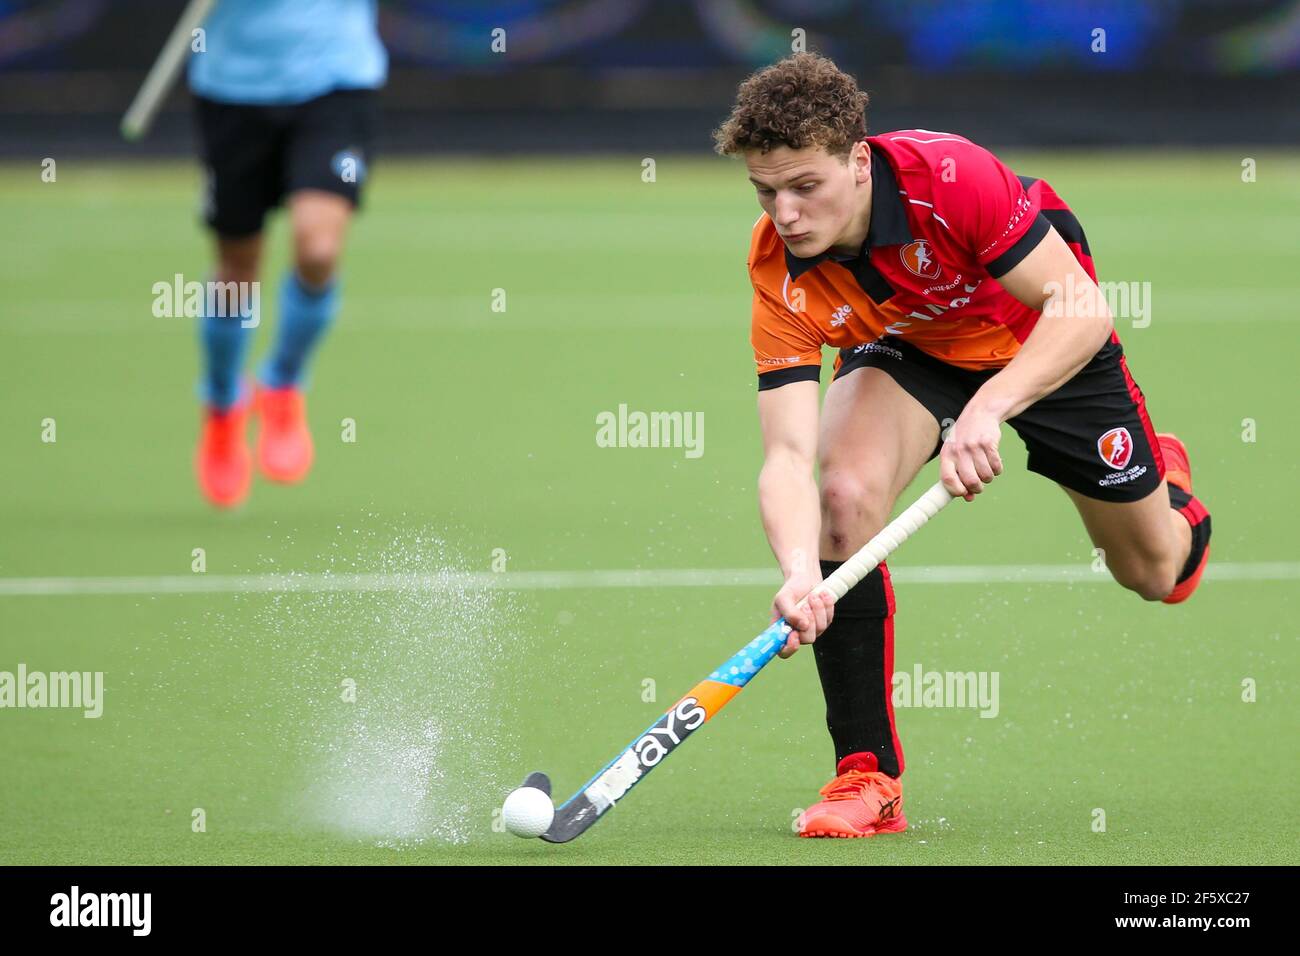 EINDHOVEN, NETHERLANDS - MARCH 28: Job Scheffers of Oranje Rood during the  Tulp Mens Hoofdklasse Hockey match between Oranje-Rood and HGC at Genneper  Stock Photo - Alamy